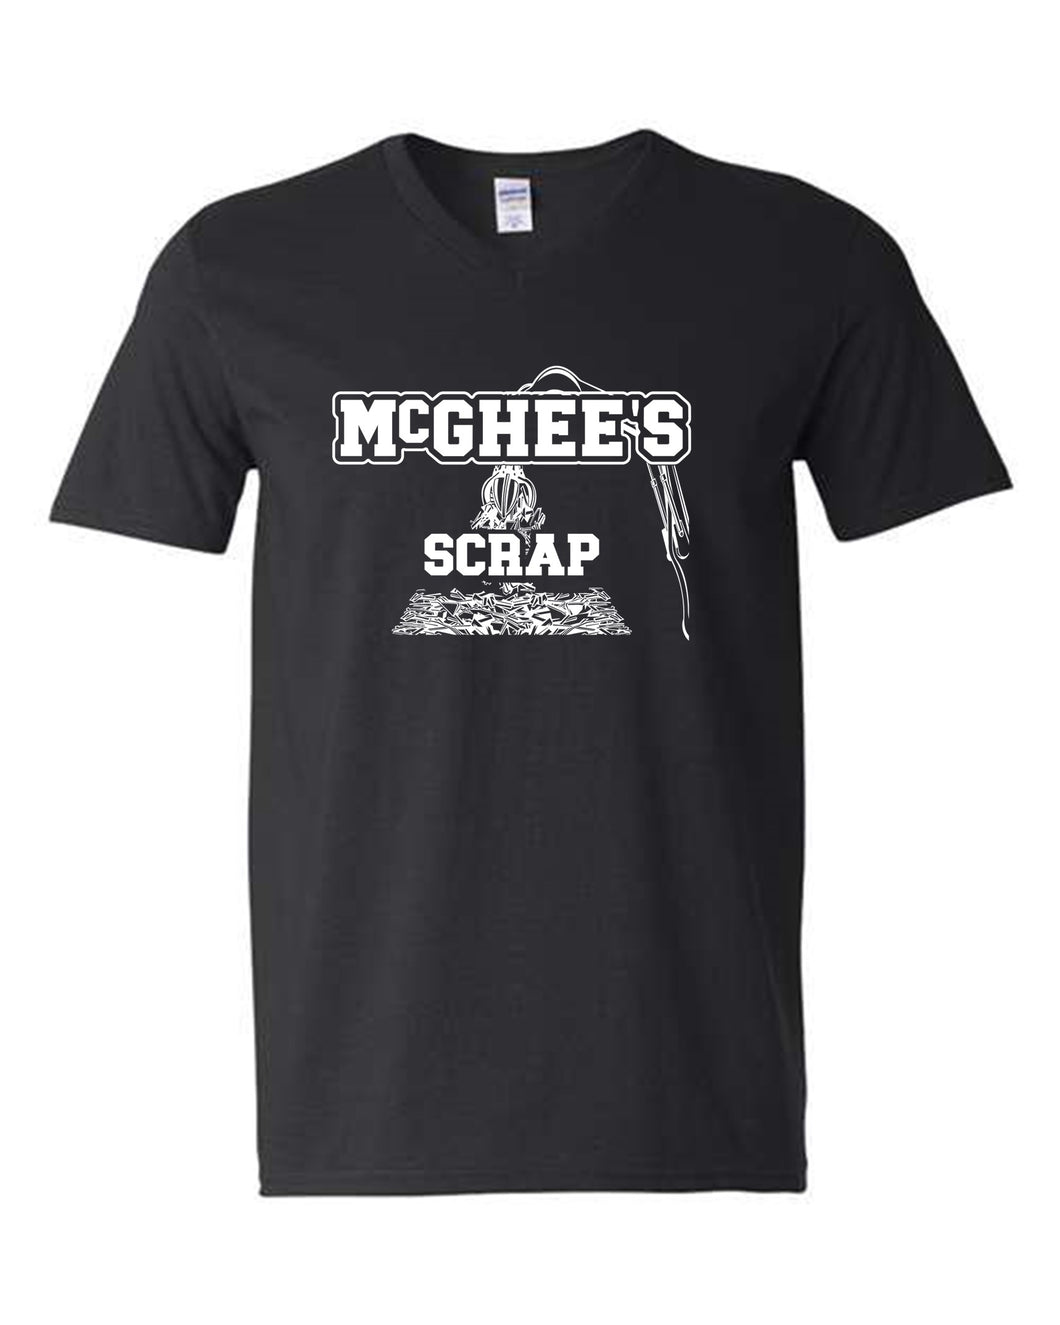 McGhee's Scrap V-Neck Short Sleeve - Adult Sizes Only